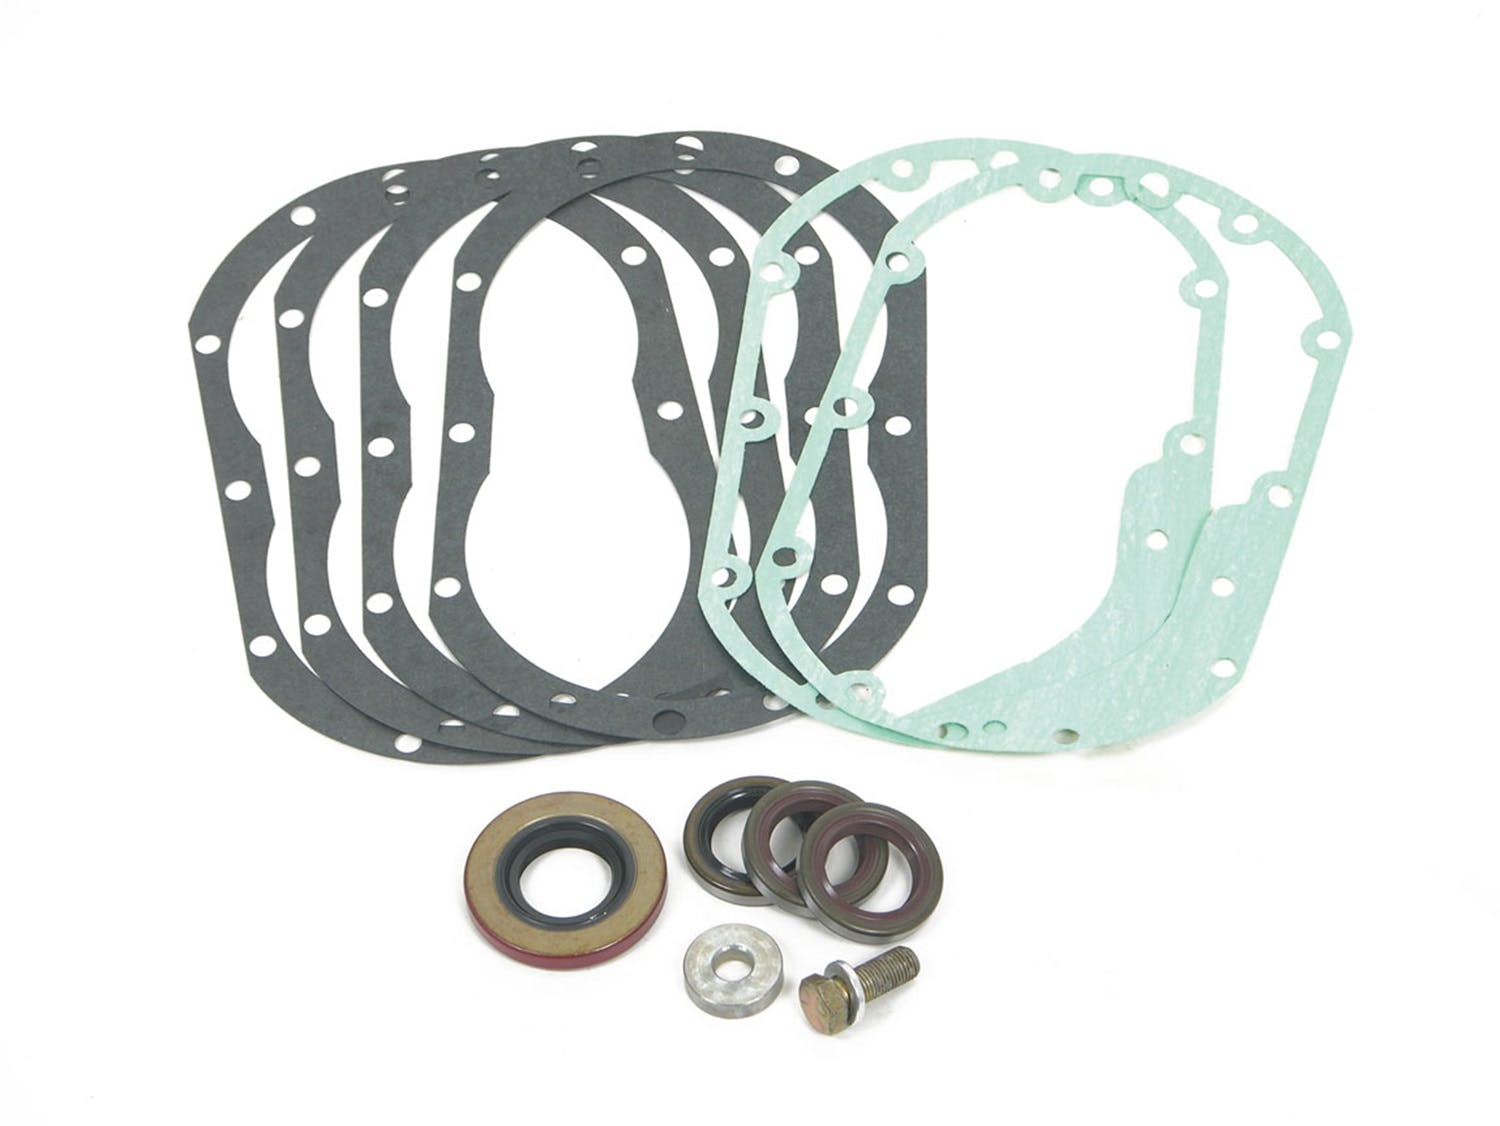 Weiand 9595 KIT - SEAL and GASKET P-S 174 FSB